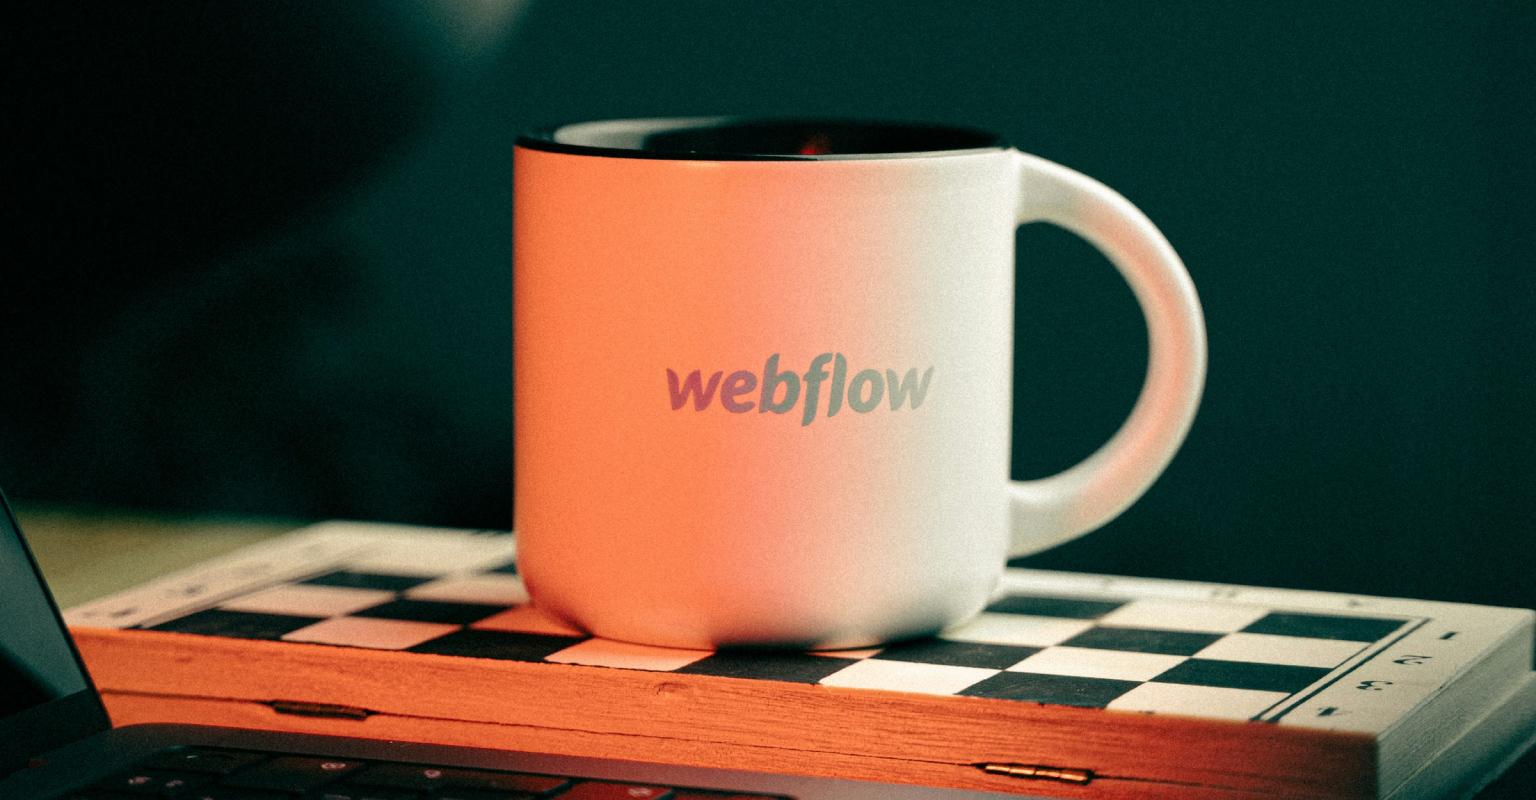 coffee cup with Webflow logo on it